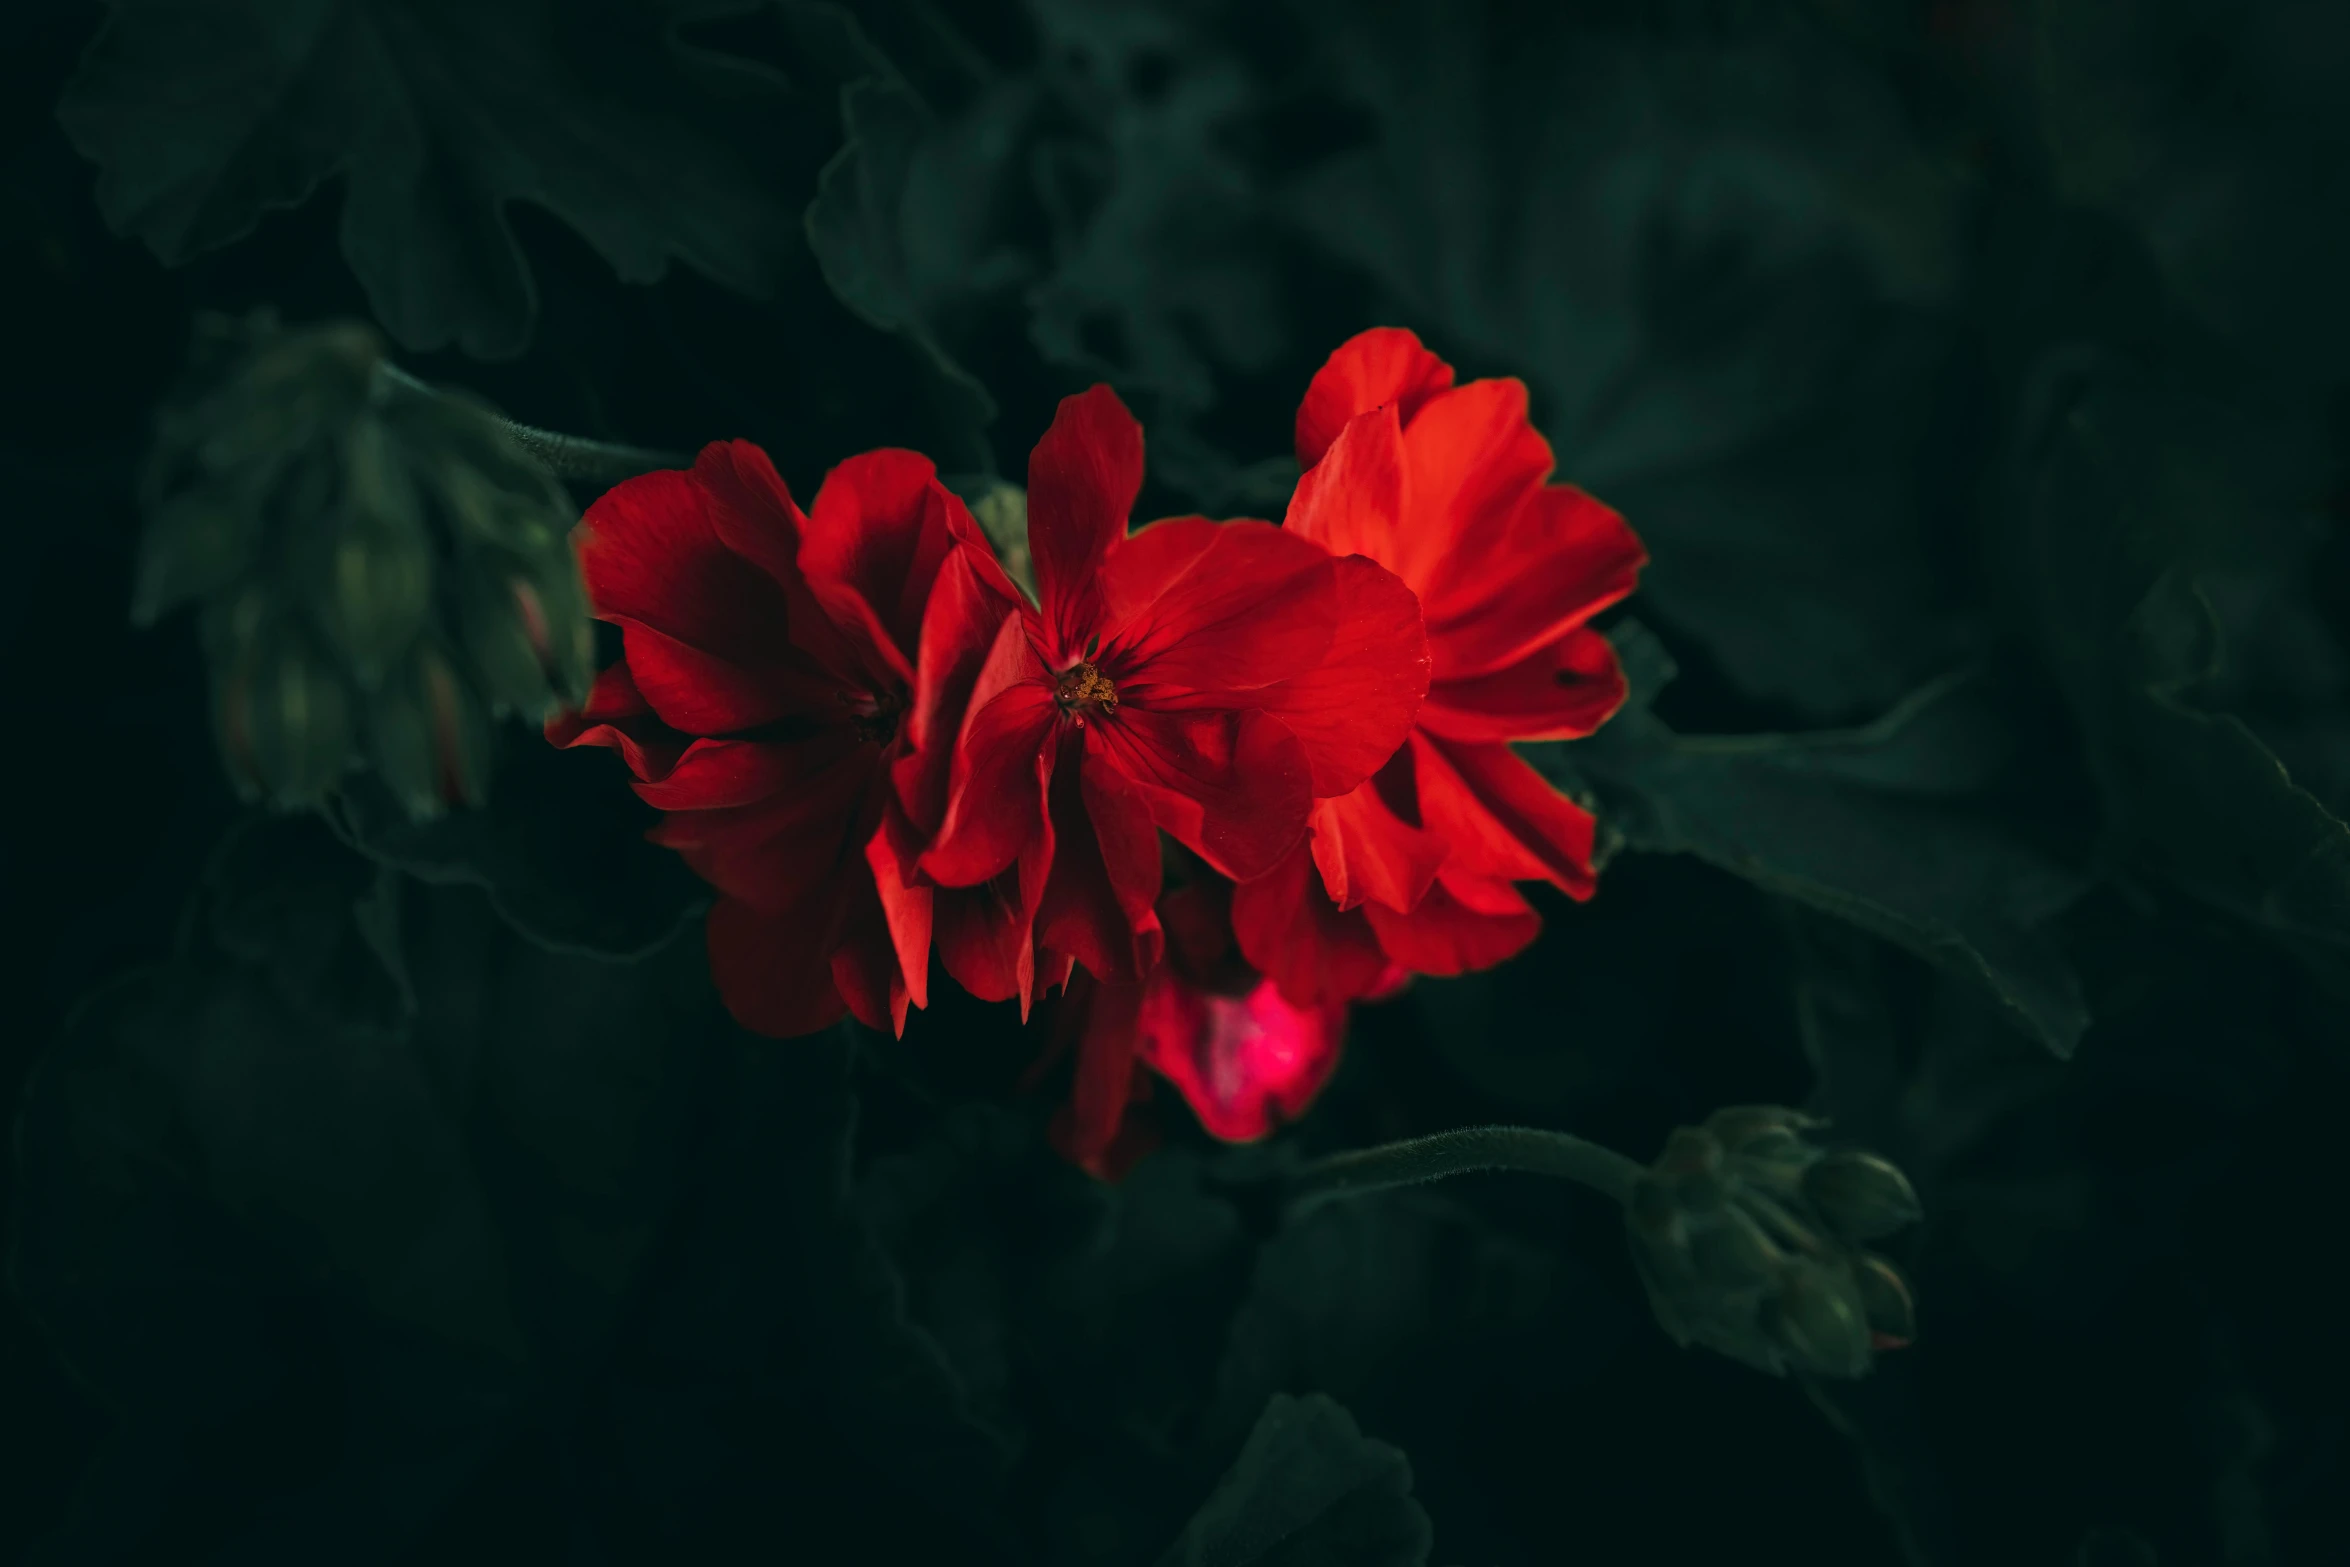 a close up of some red flowers in the dark